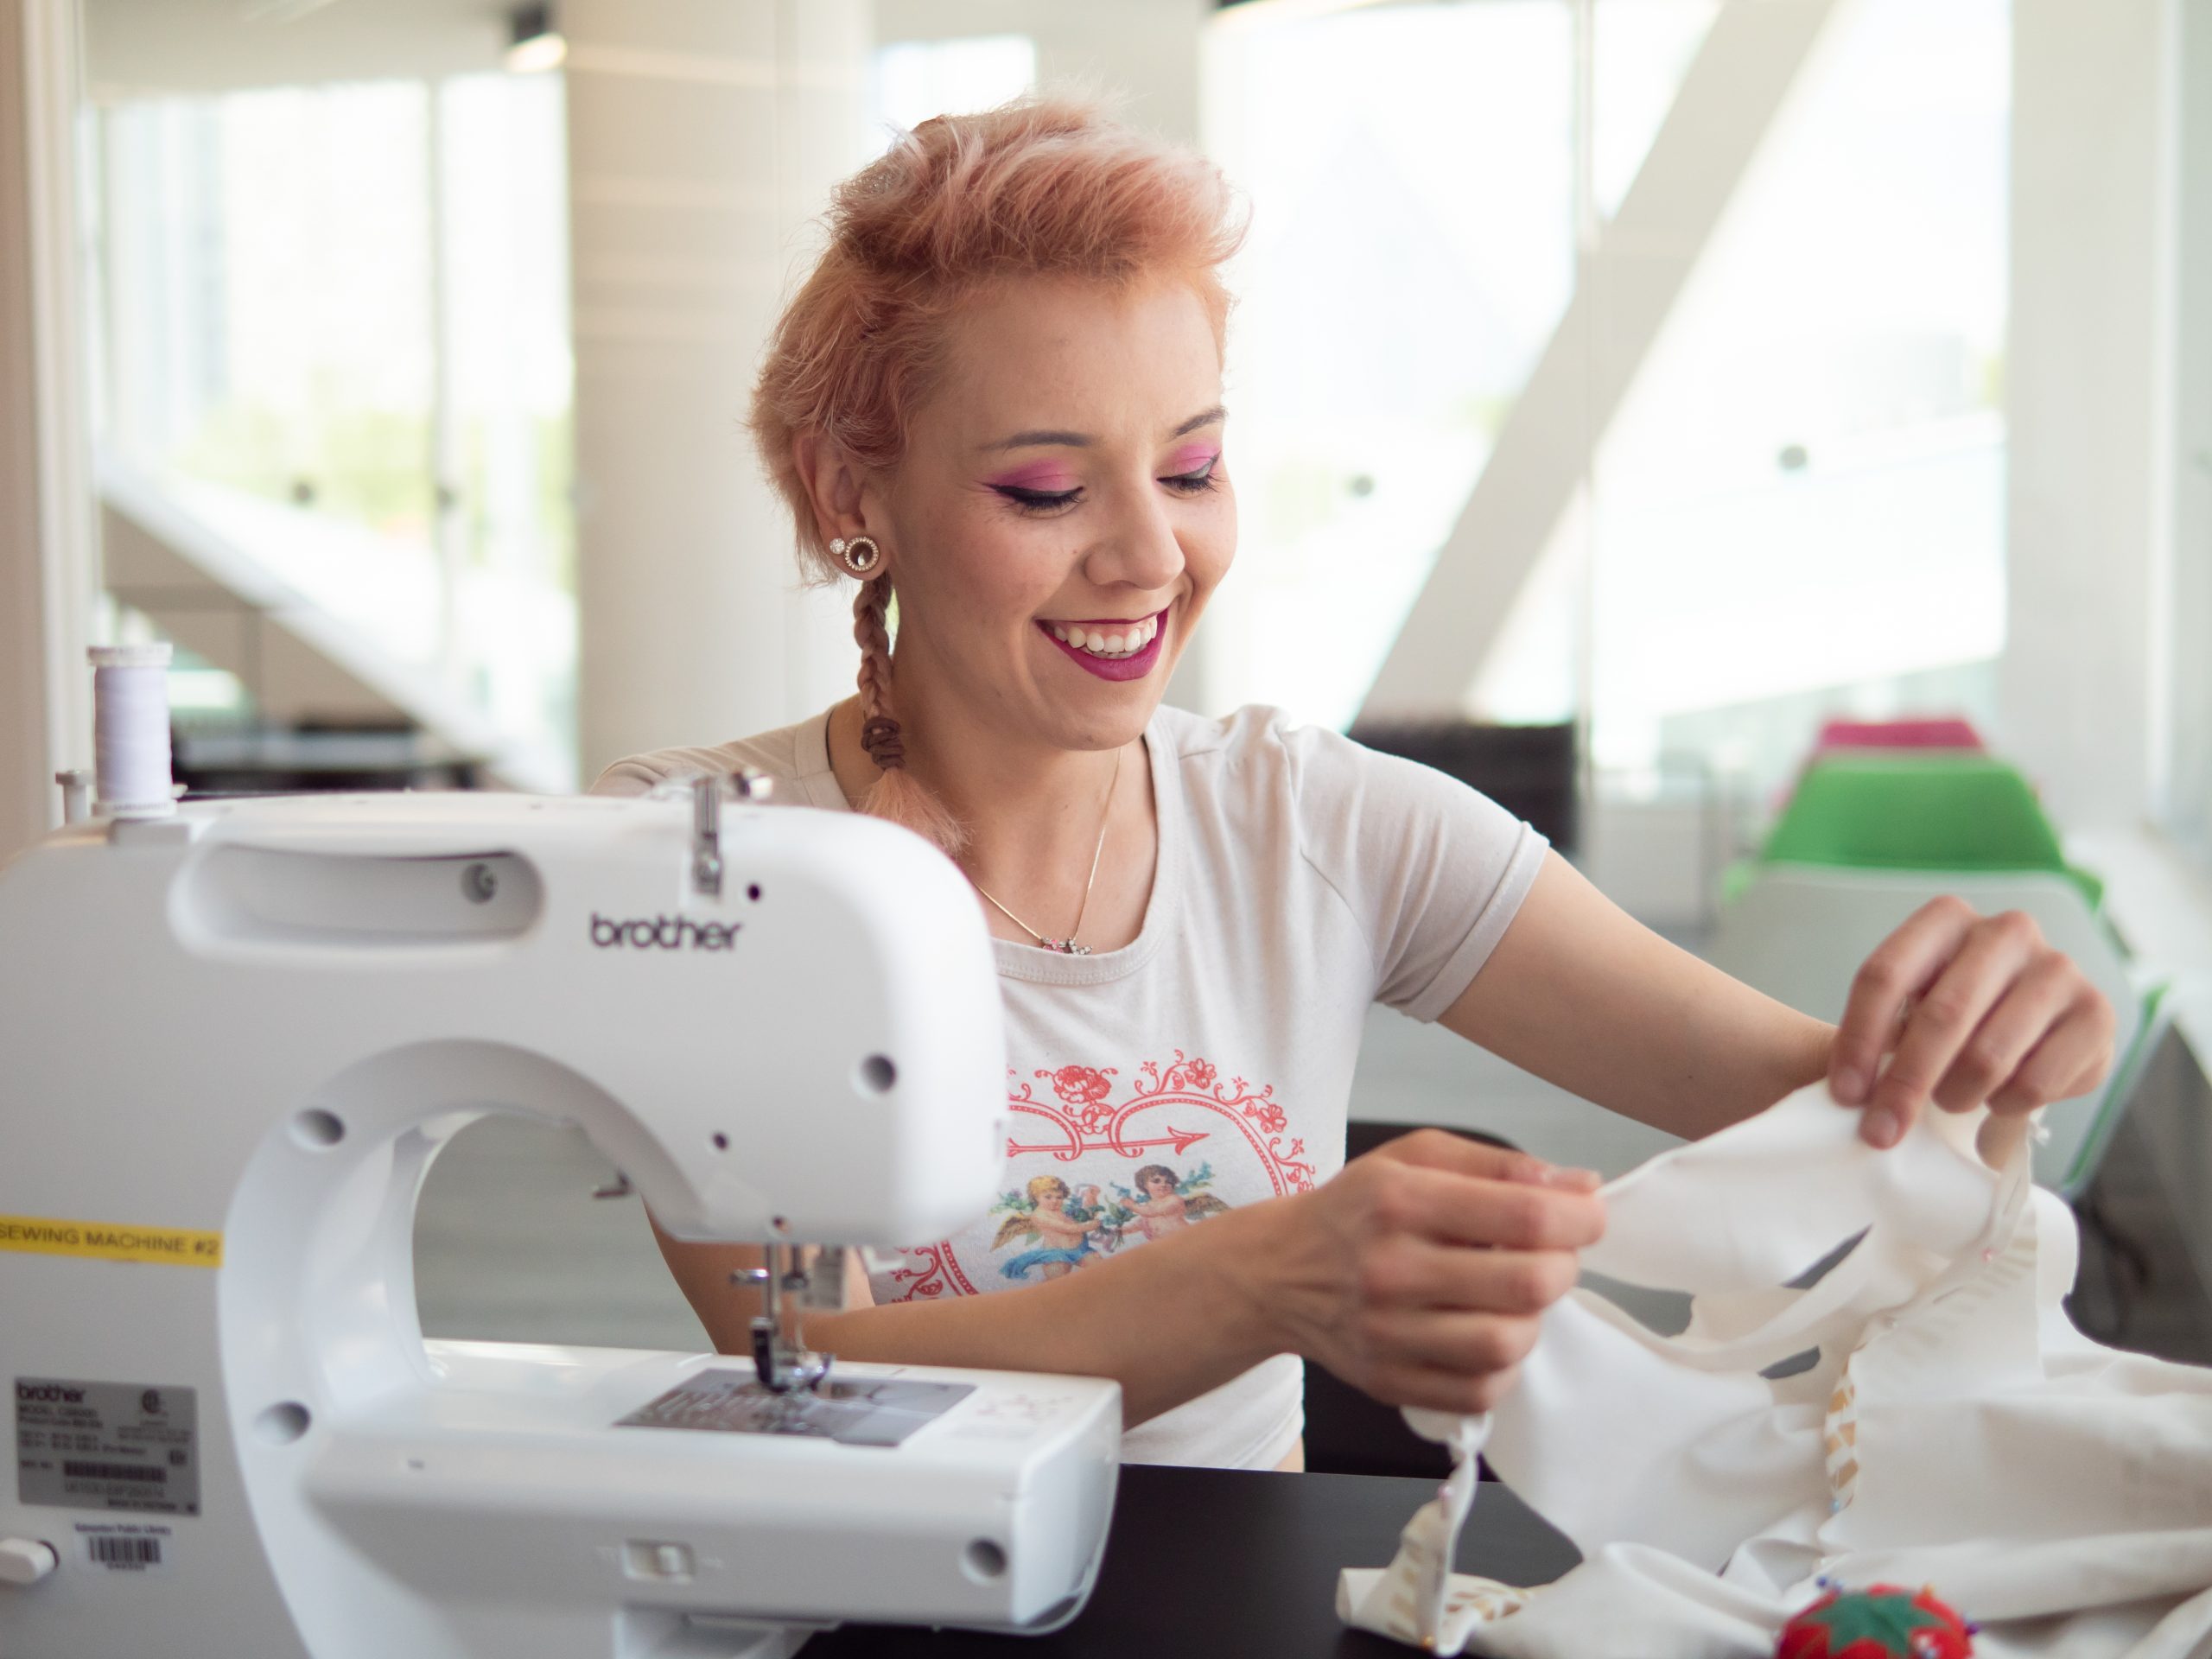 A person smiling while using the sewing machine